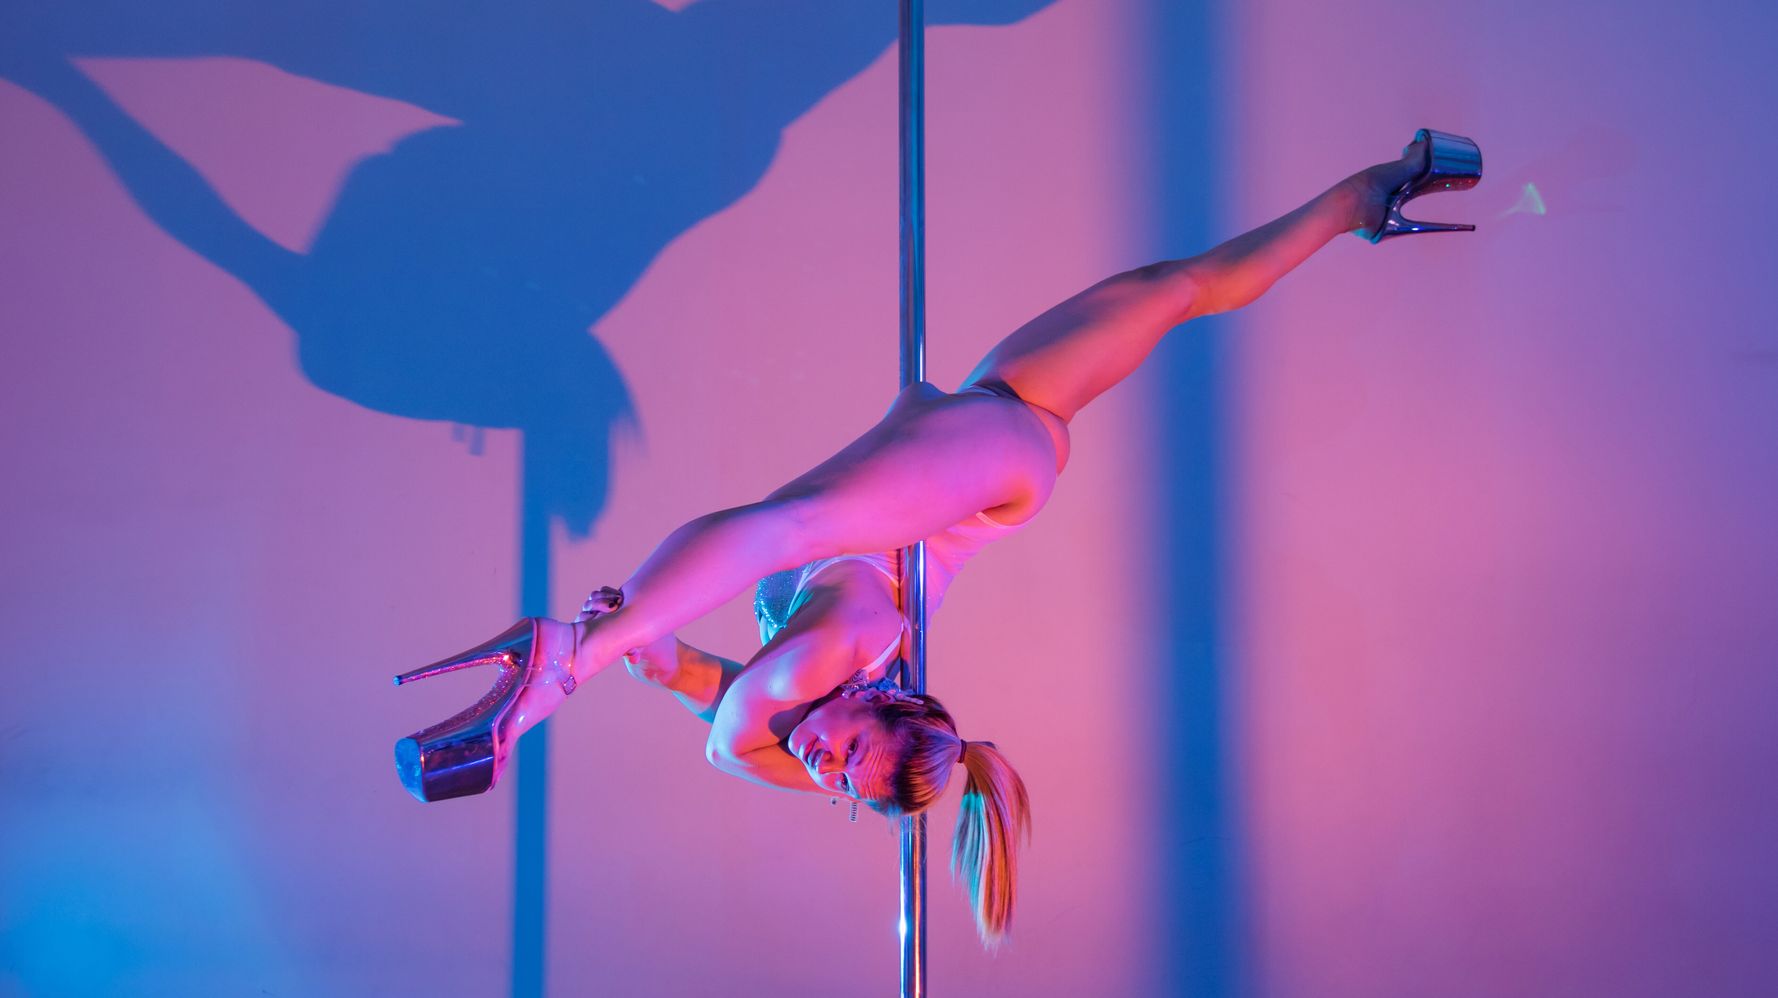 When I Was Outed For My Porn Past, Pole Dancing Helped Me Heal | HuffPost